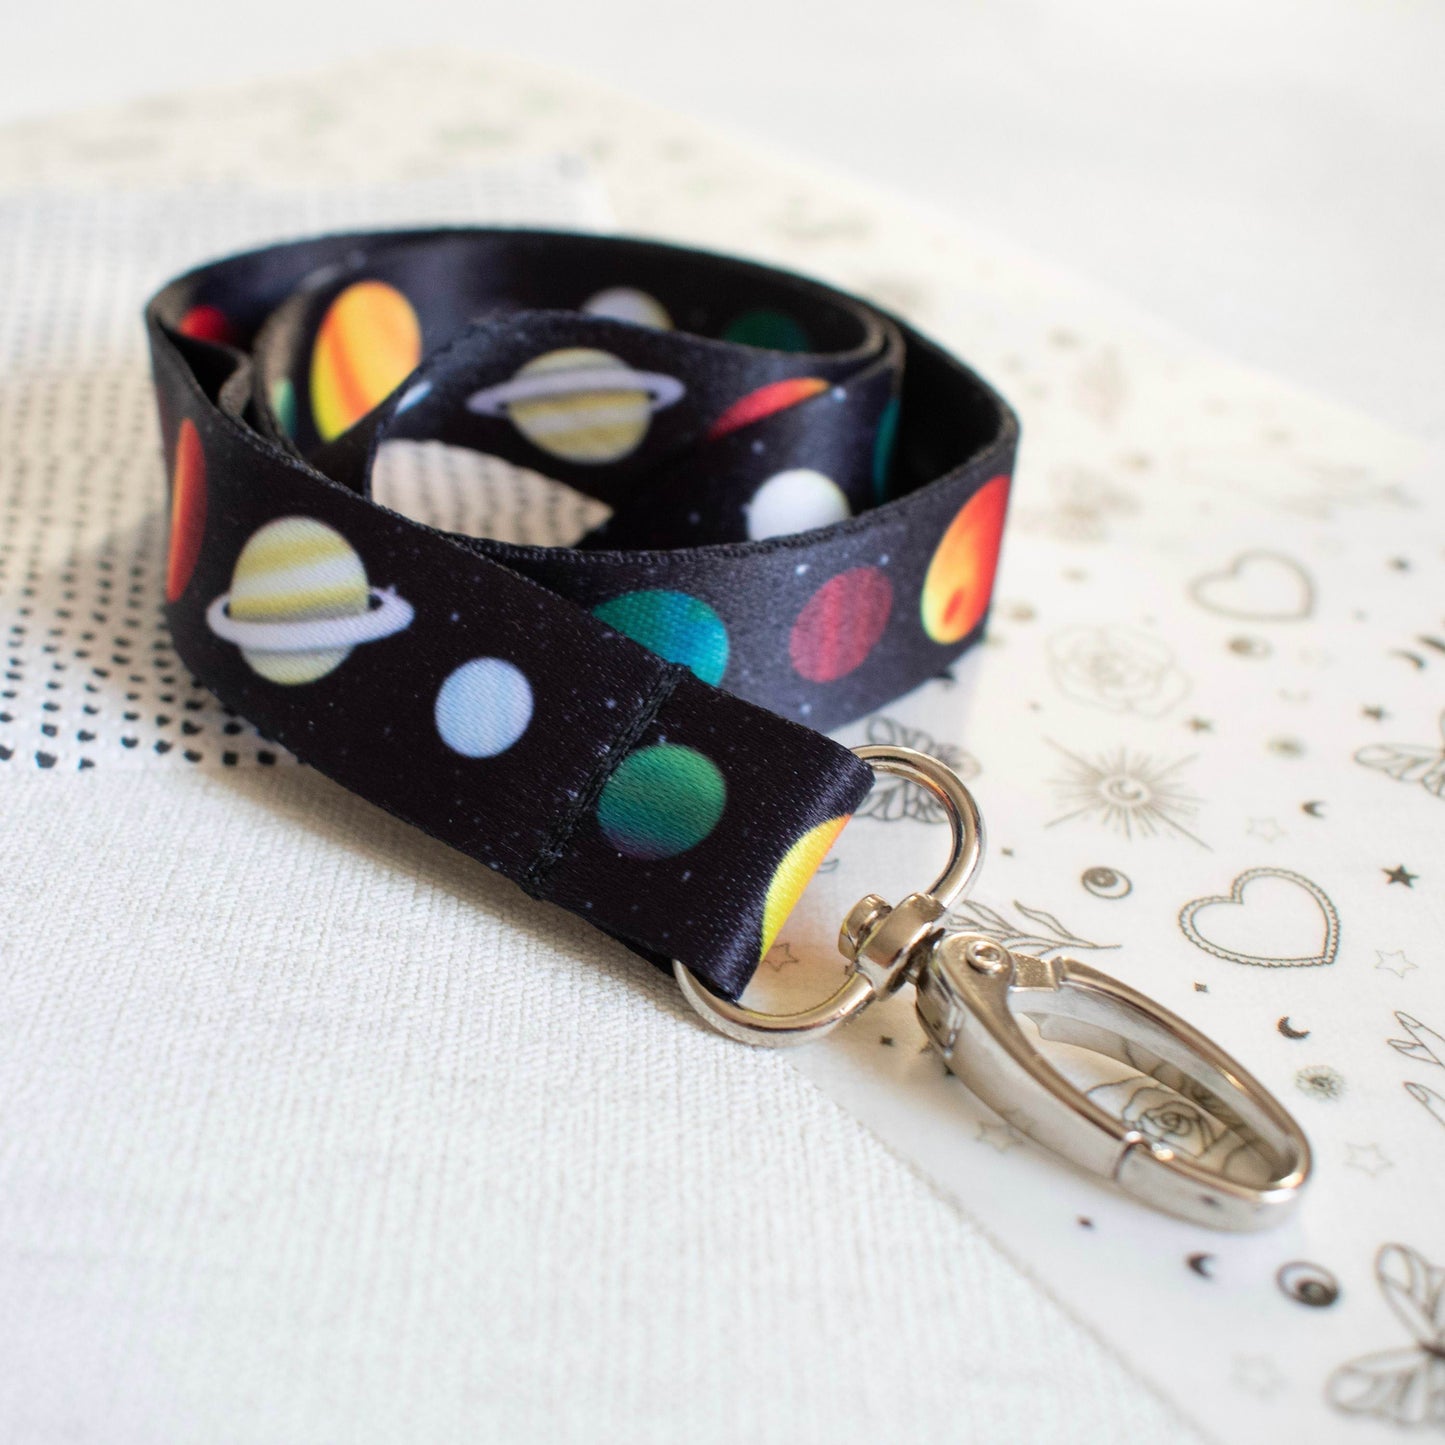  A black lanyard is pictured with full colour planetary pattern going up the length of it. Each planet is illustrated in full colour. The lanyard has an oval hook accessory at the end.